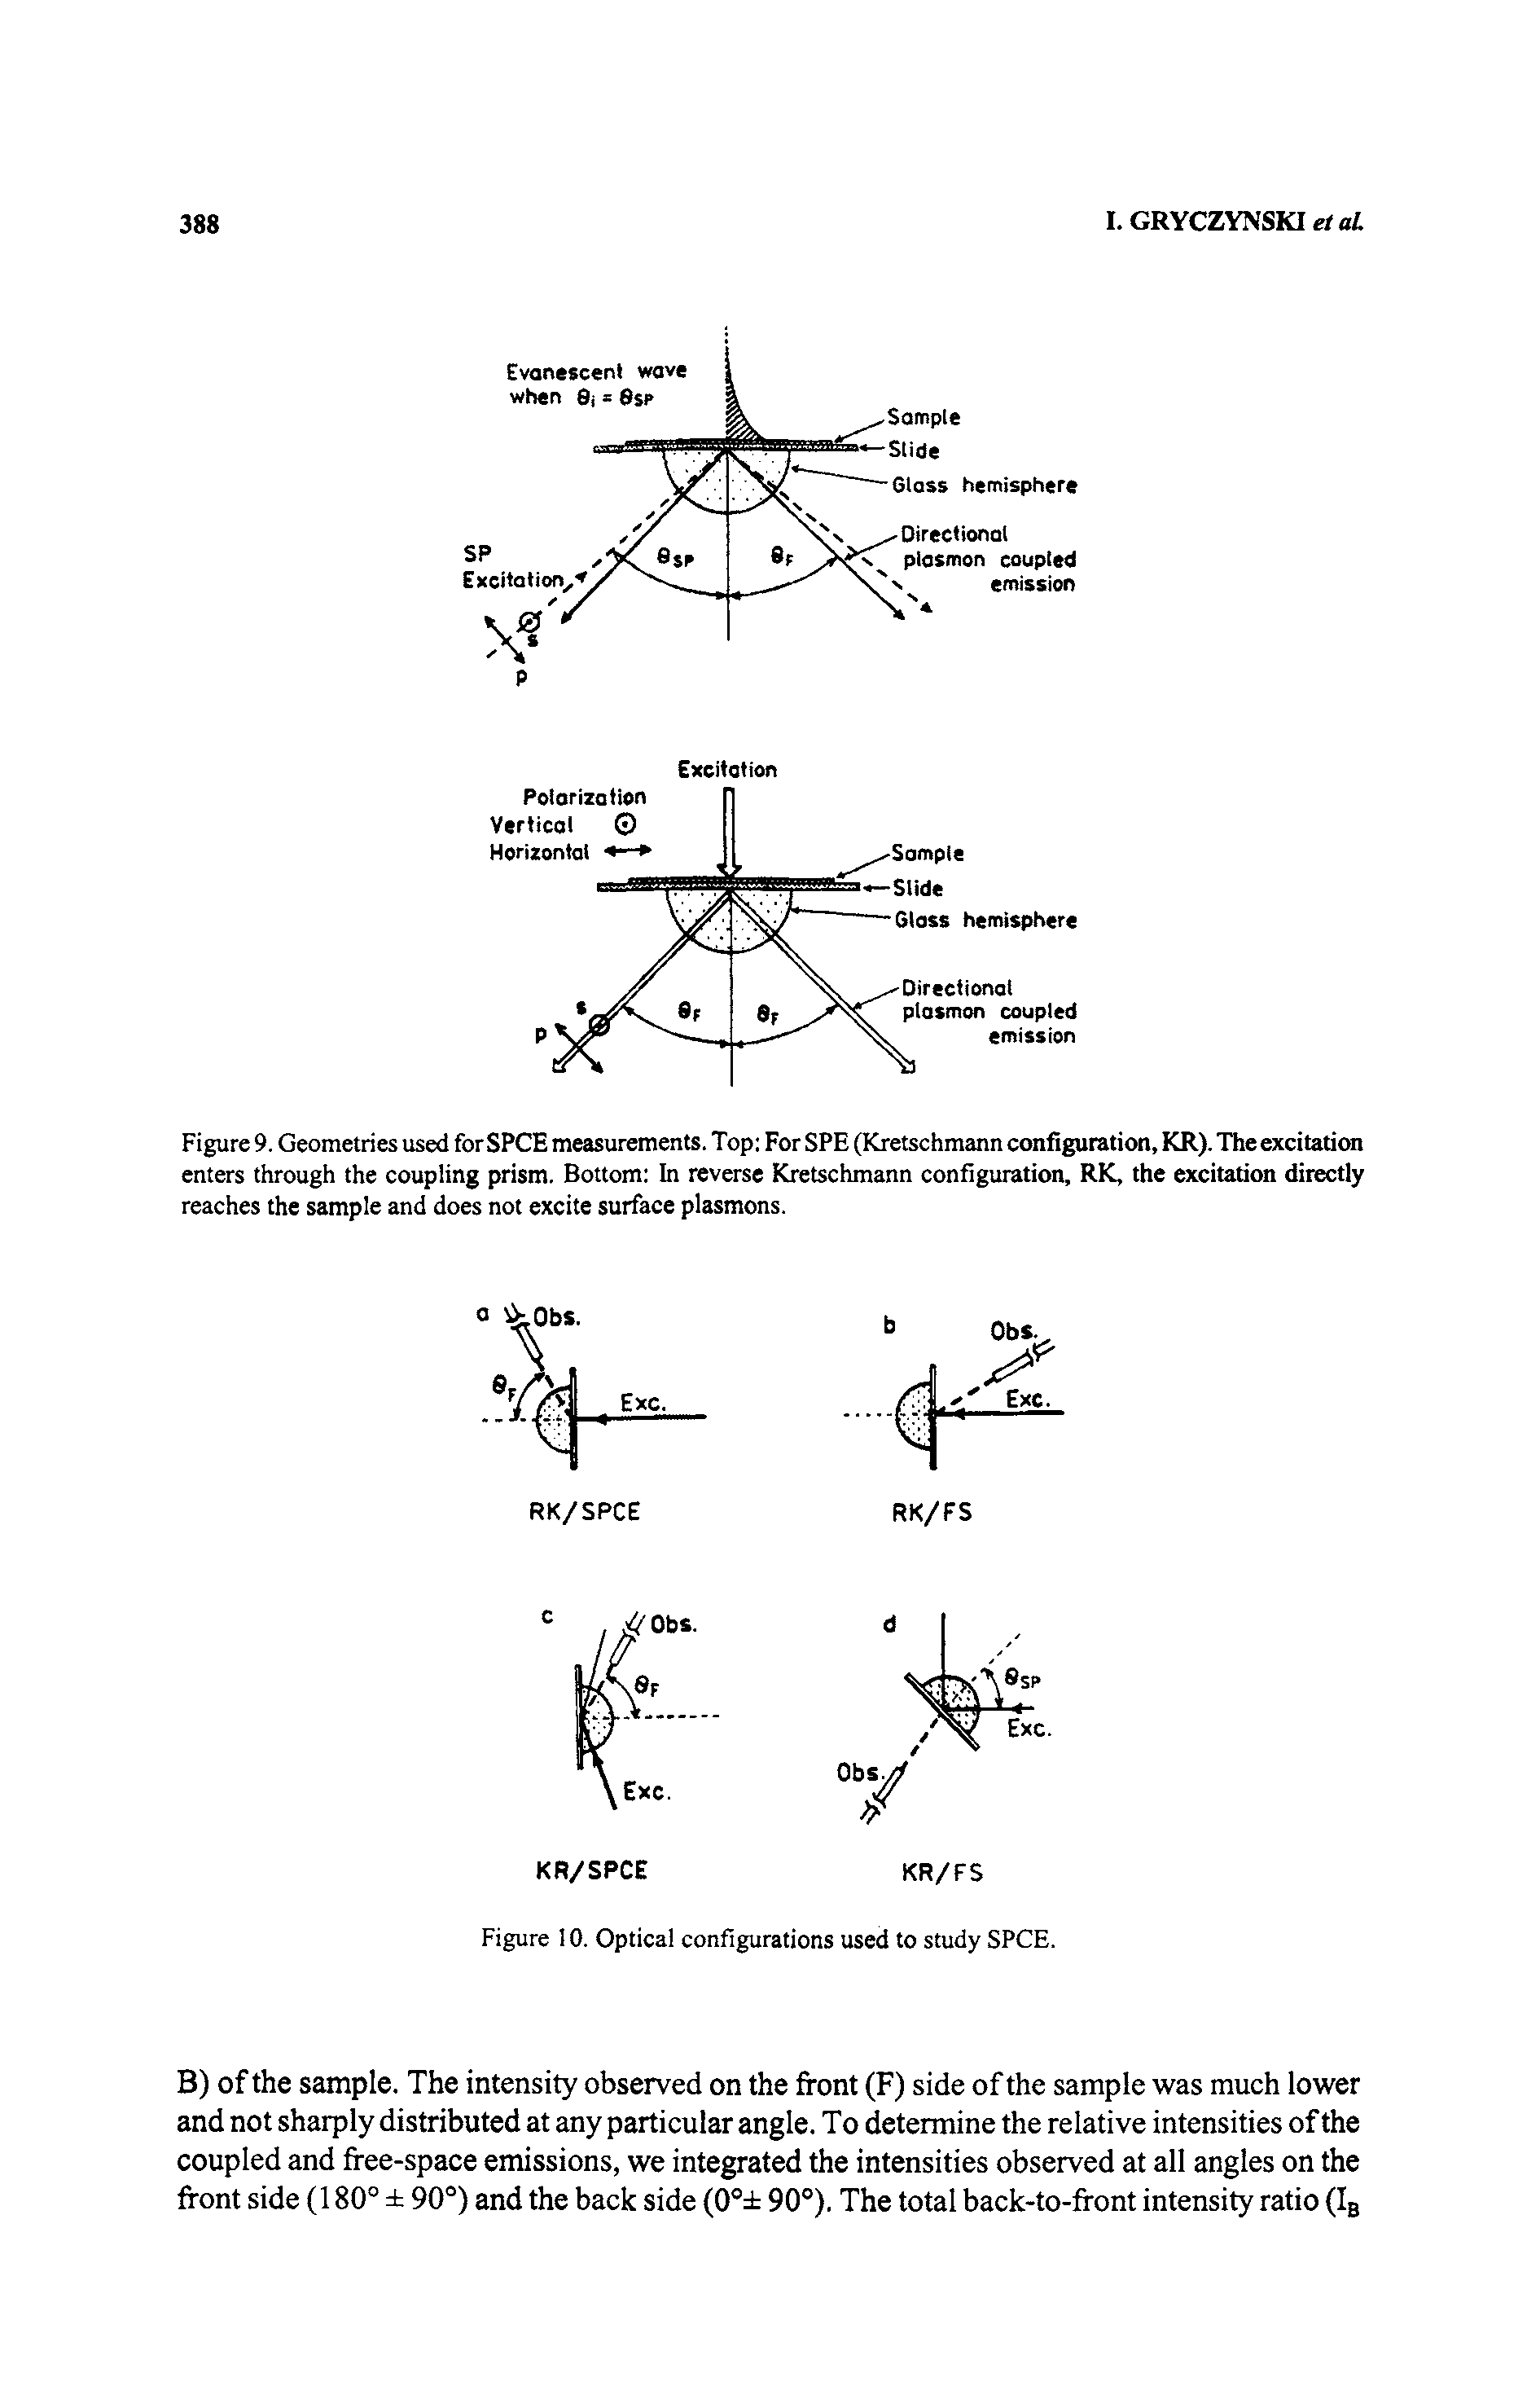 Figure 9. Geometries used for SPCE measurements. Top For SPE (Kretschmann configuration, KR). The excitation enters through the coupling prism. Bottom In reverse Kretschmann configuration, RK, the excitafitm directly reaches the sample and does not excite surface plasmons.